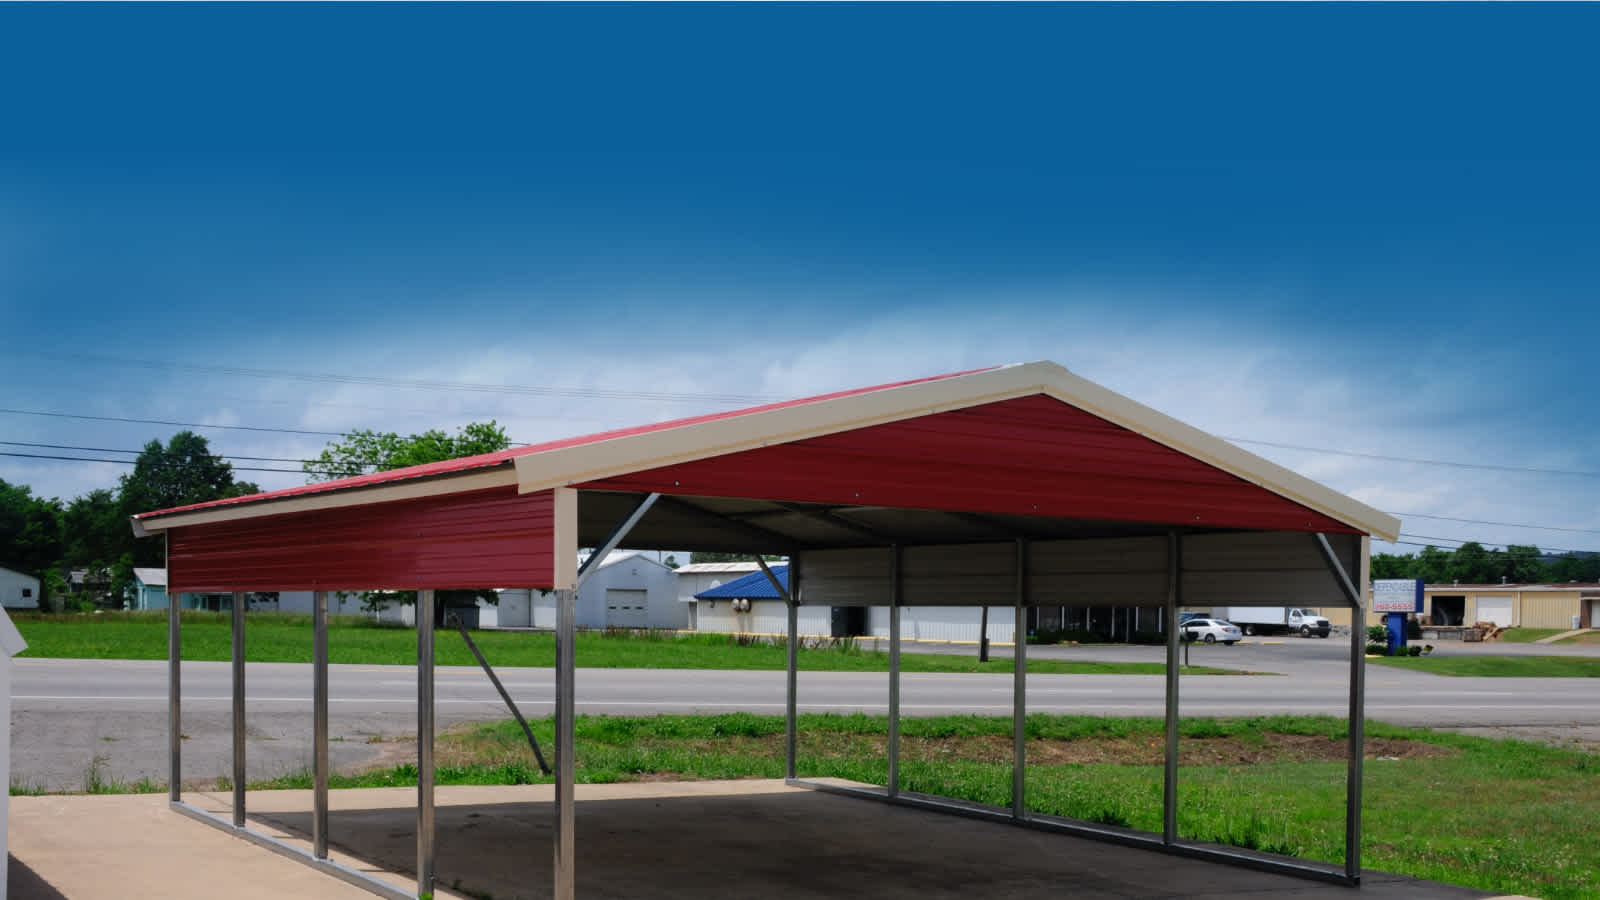 Metal Carports - Strong, Durable Structure To Protect Your #Vehicle